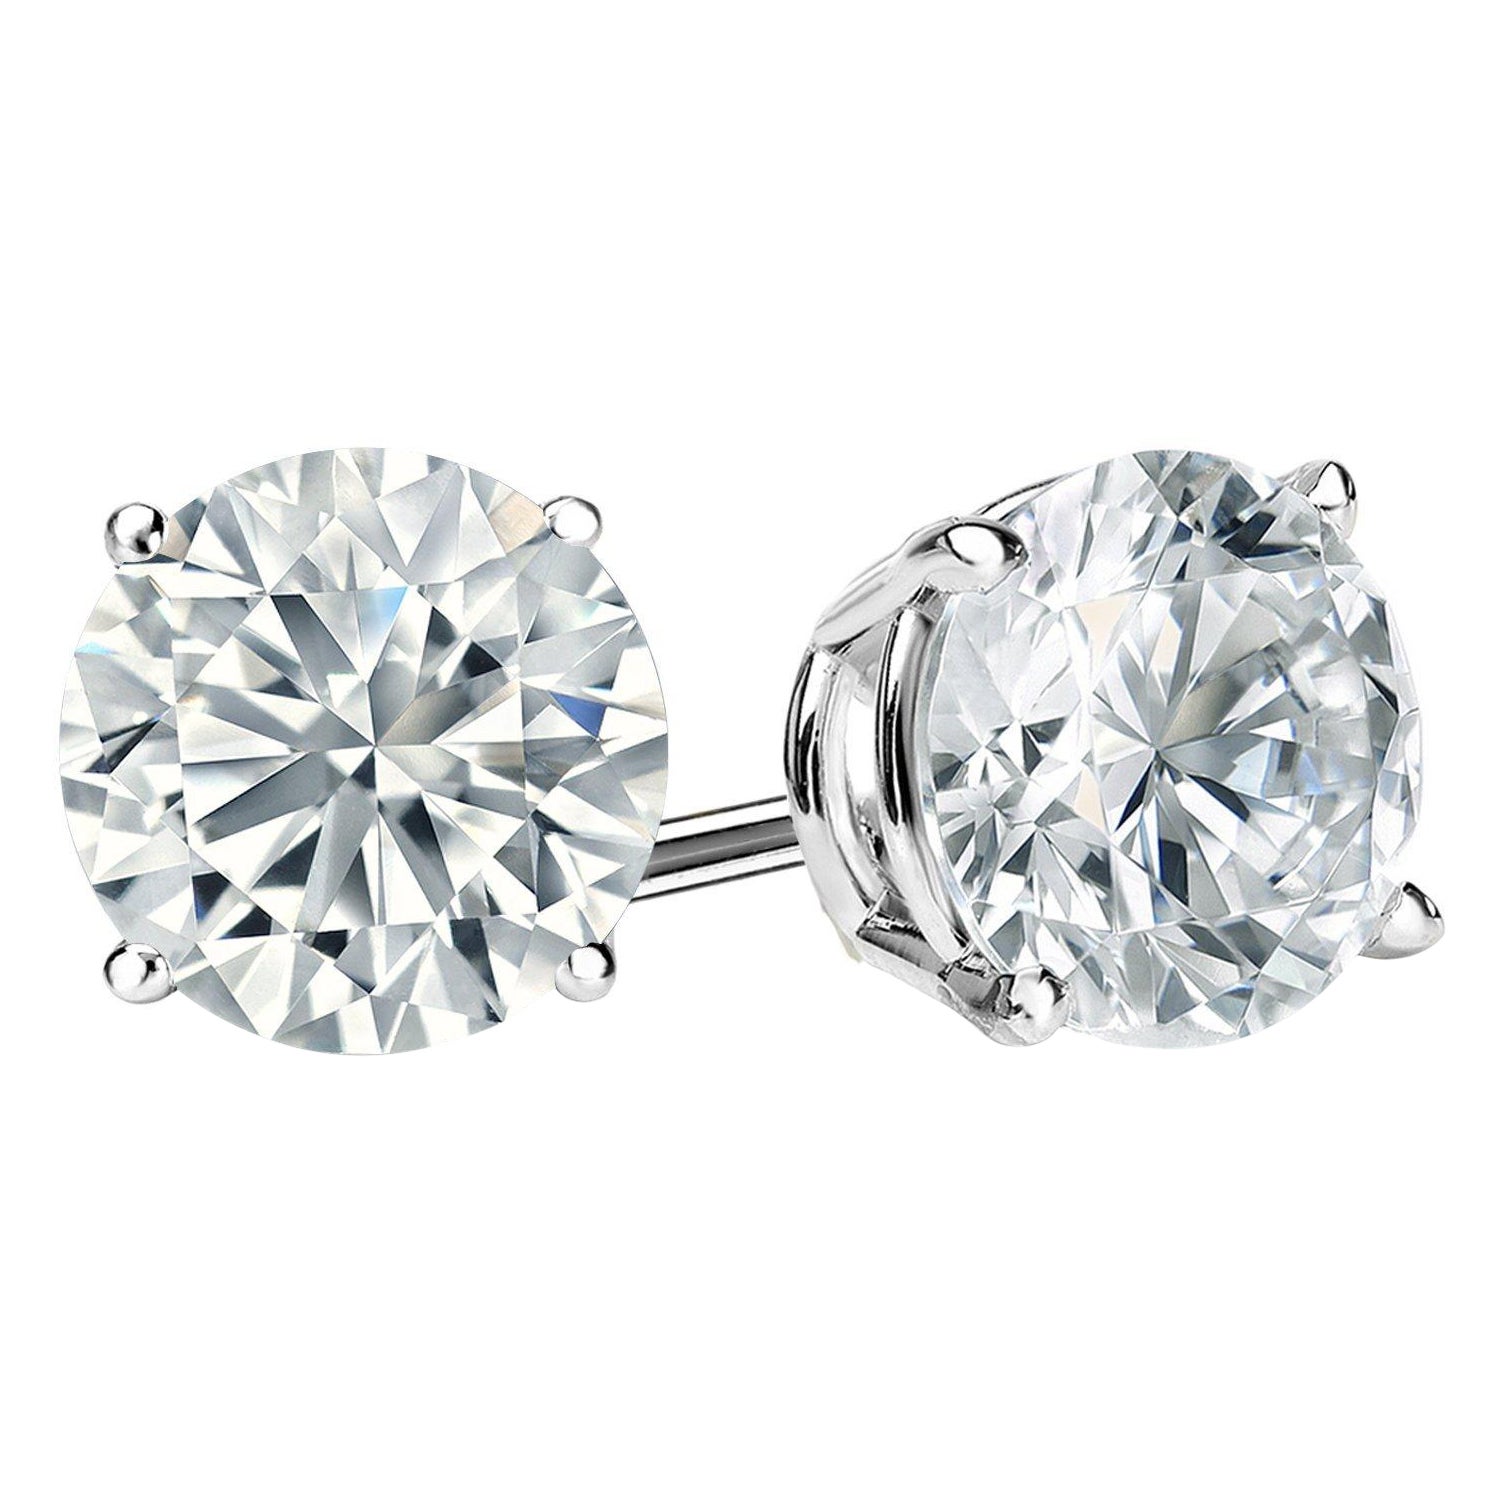 Beauvince GIA ISI1 Certified 2.01 Carat Round Diamond Studs For Sale